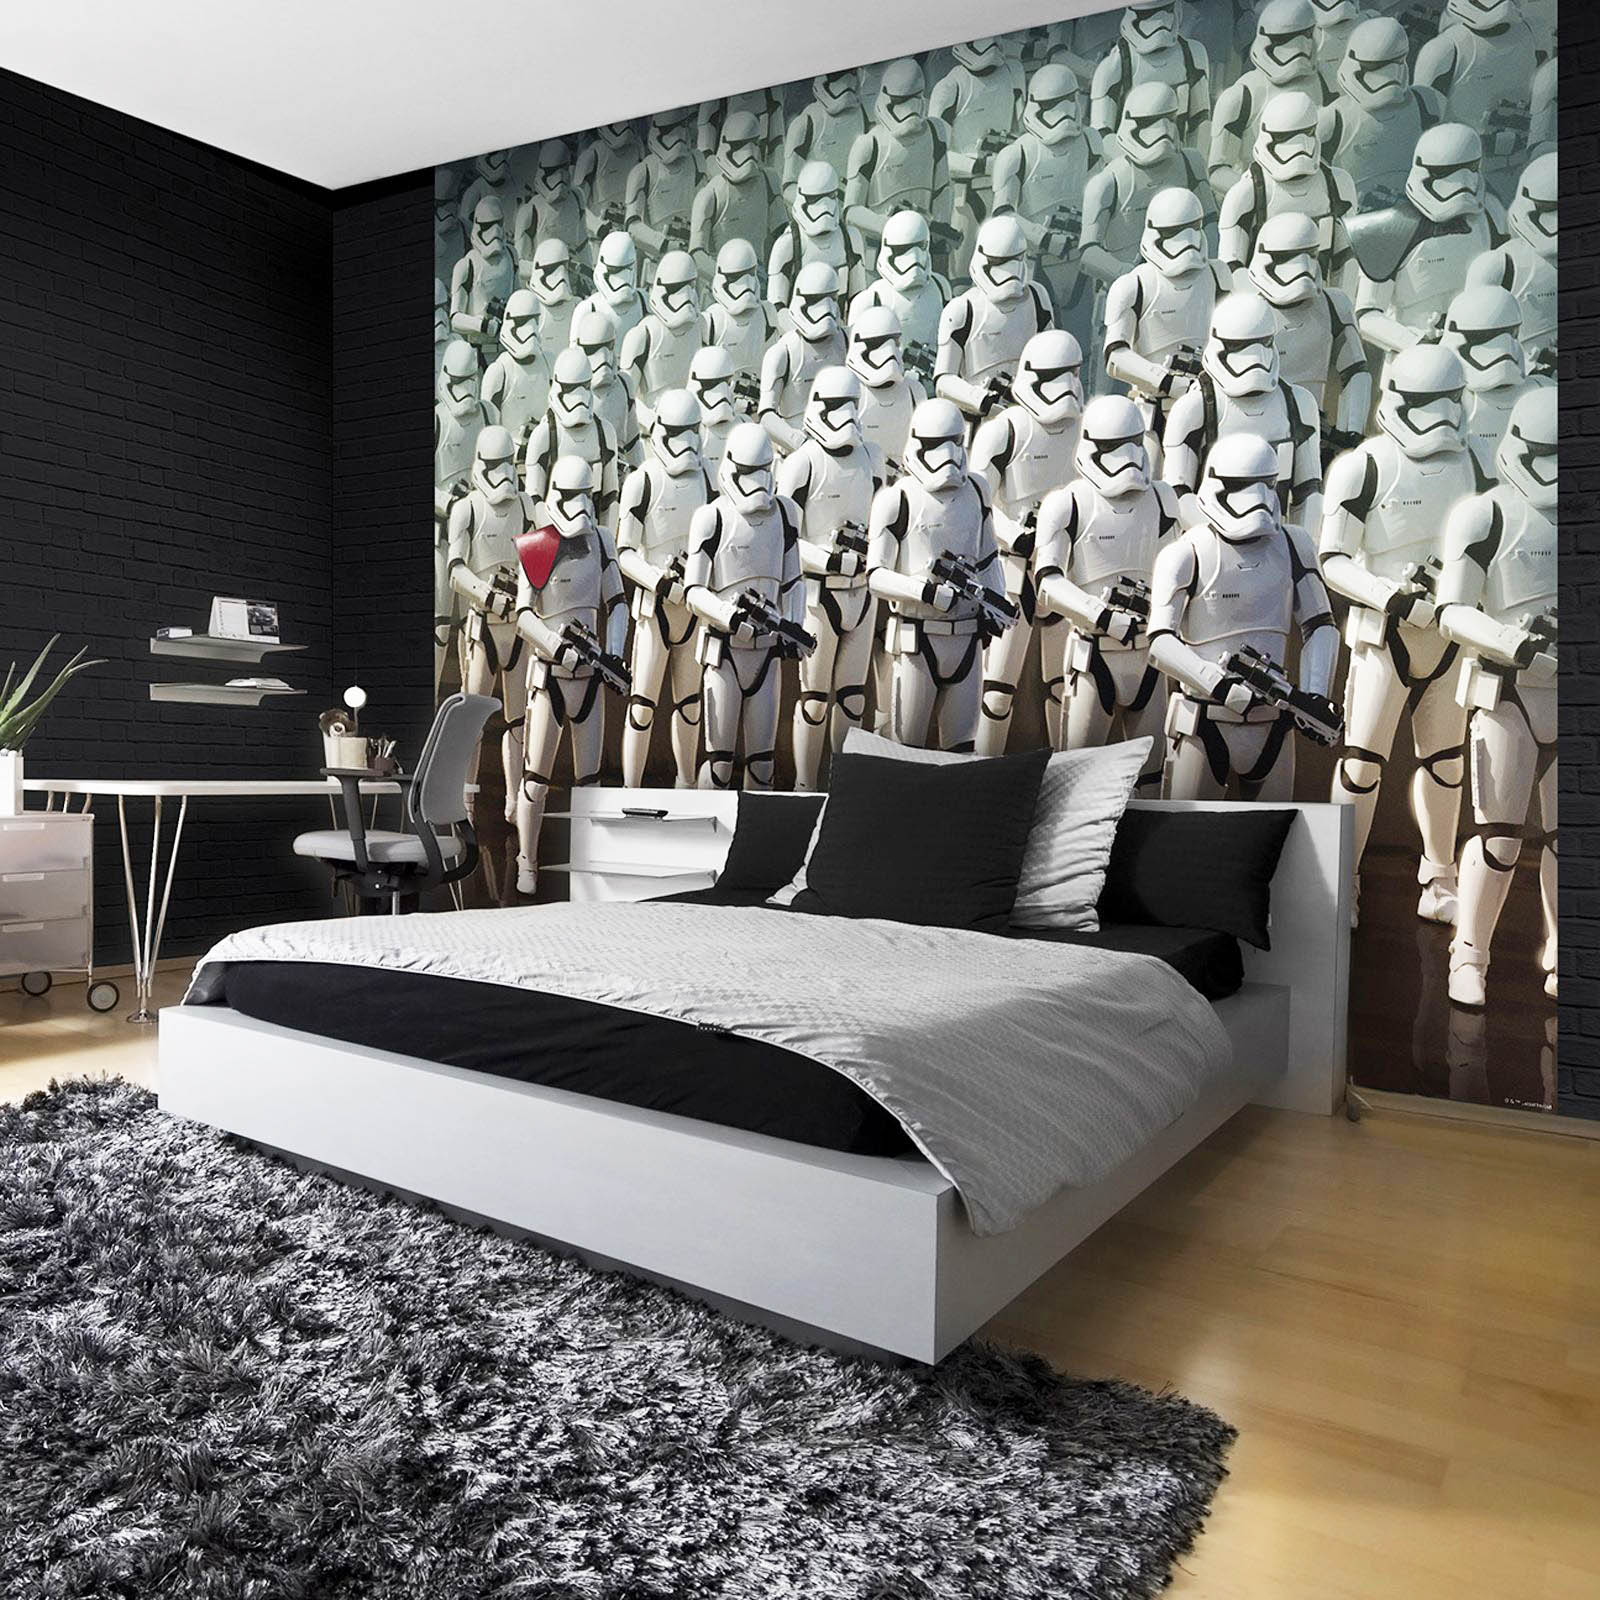 Little did they know, once they got past my ring doorbell I had an entire army of storm troopers in my room, pretty cool wallpaper.